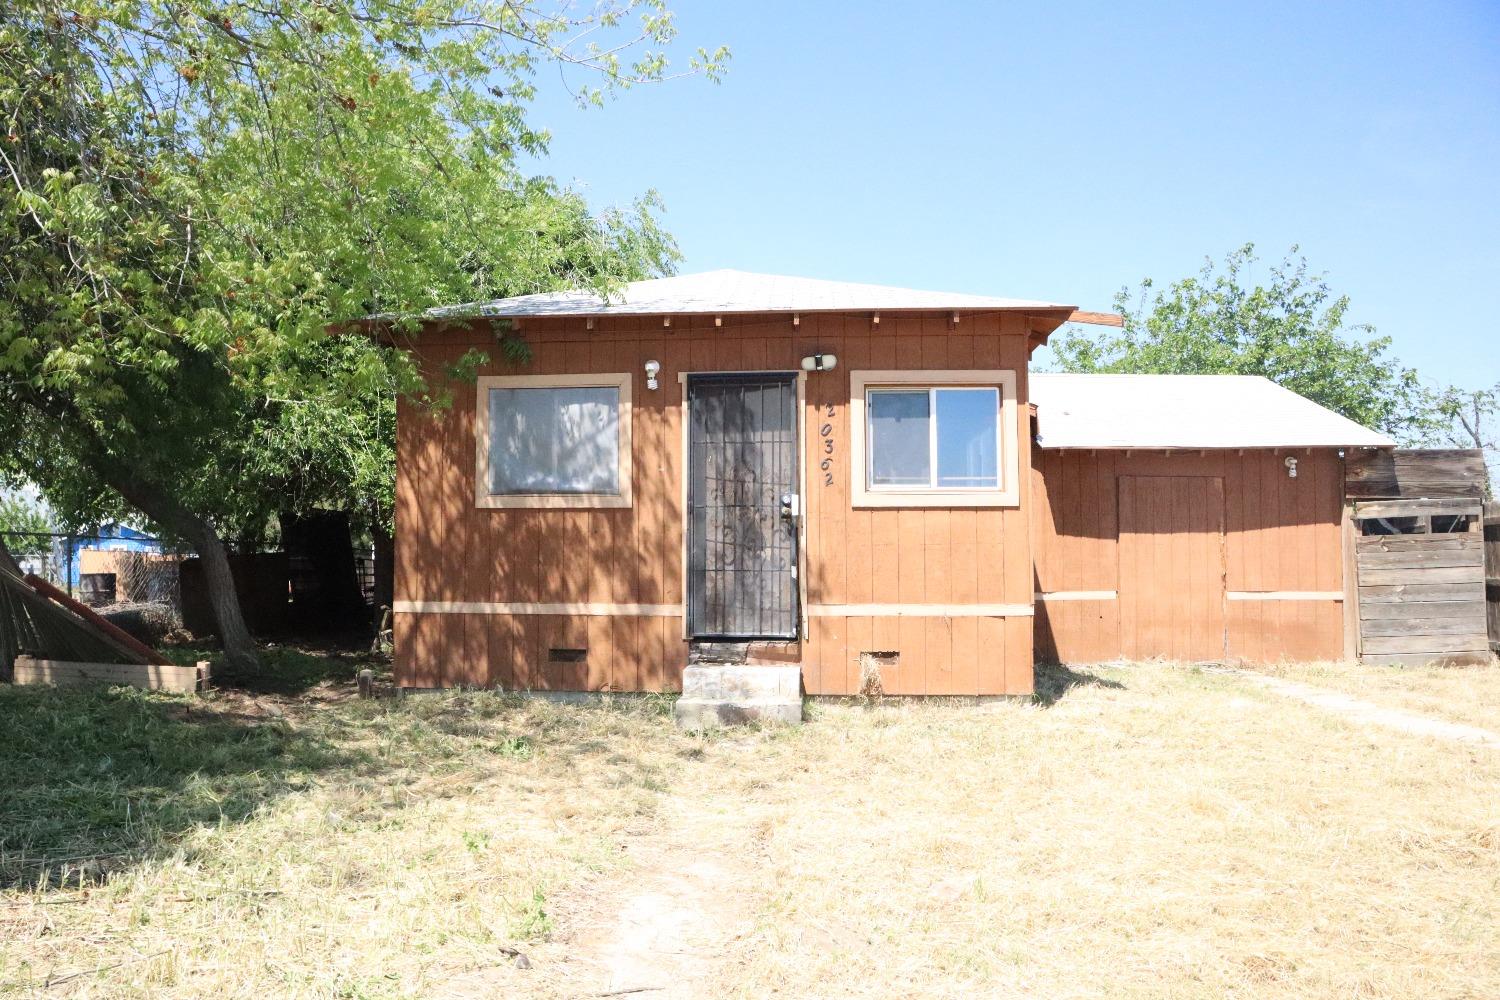 Photo of 20362 5th St in Stratford, CA